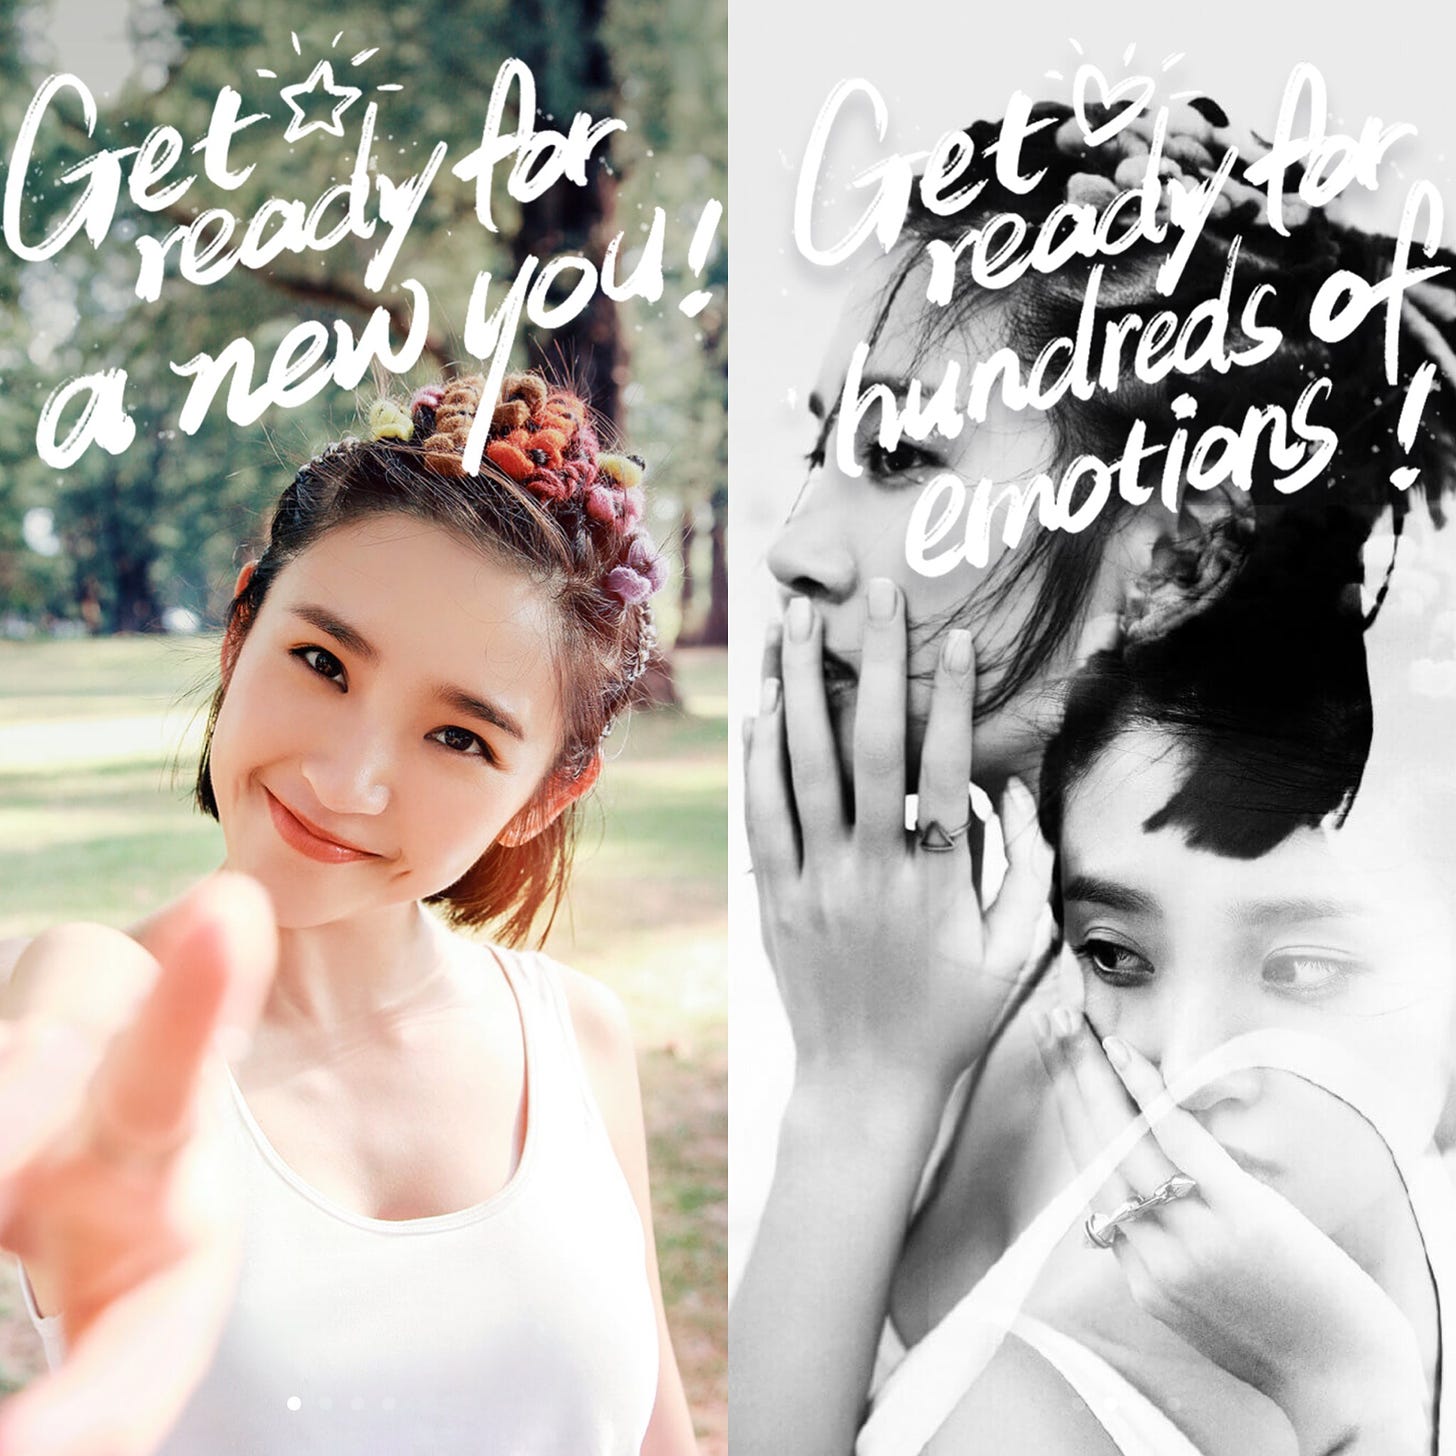 Welcome screens from the Meitu app.